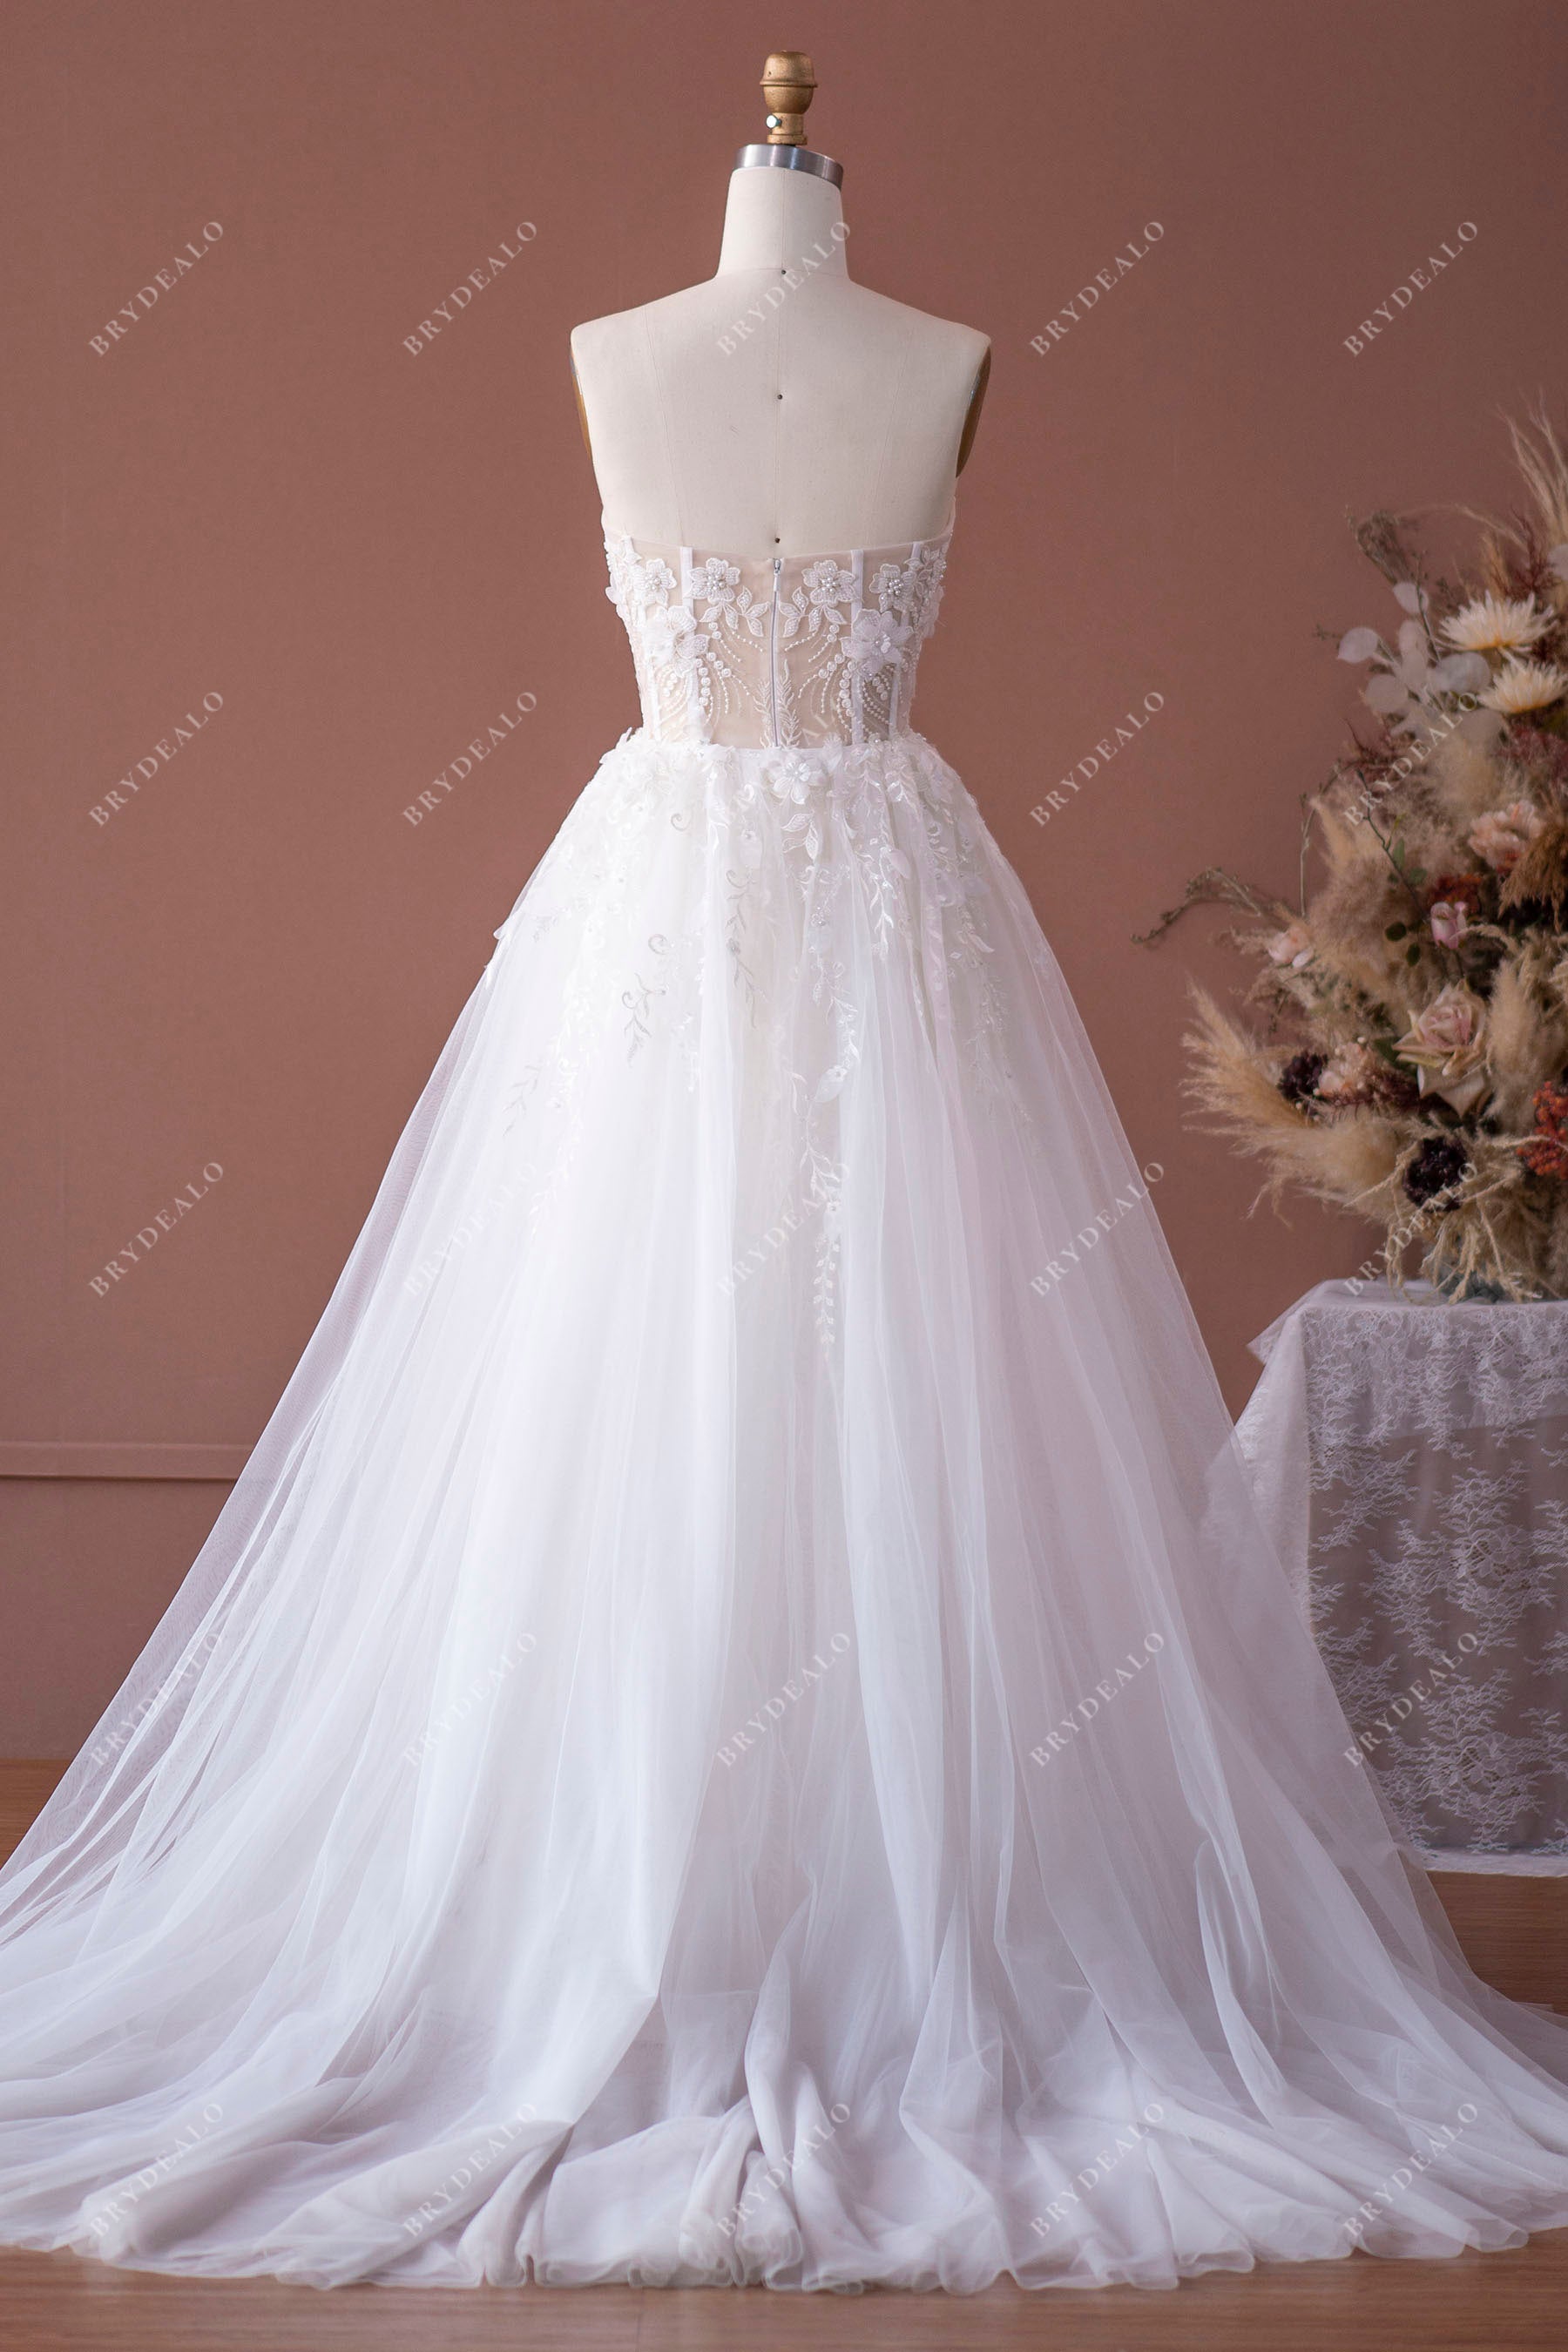 Strapless Flower Corset Bridal Gown with Plump Tulle Overskirt